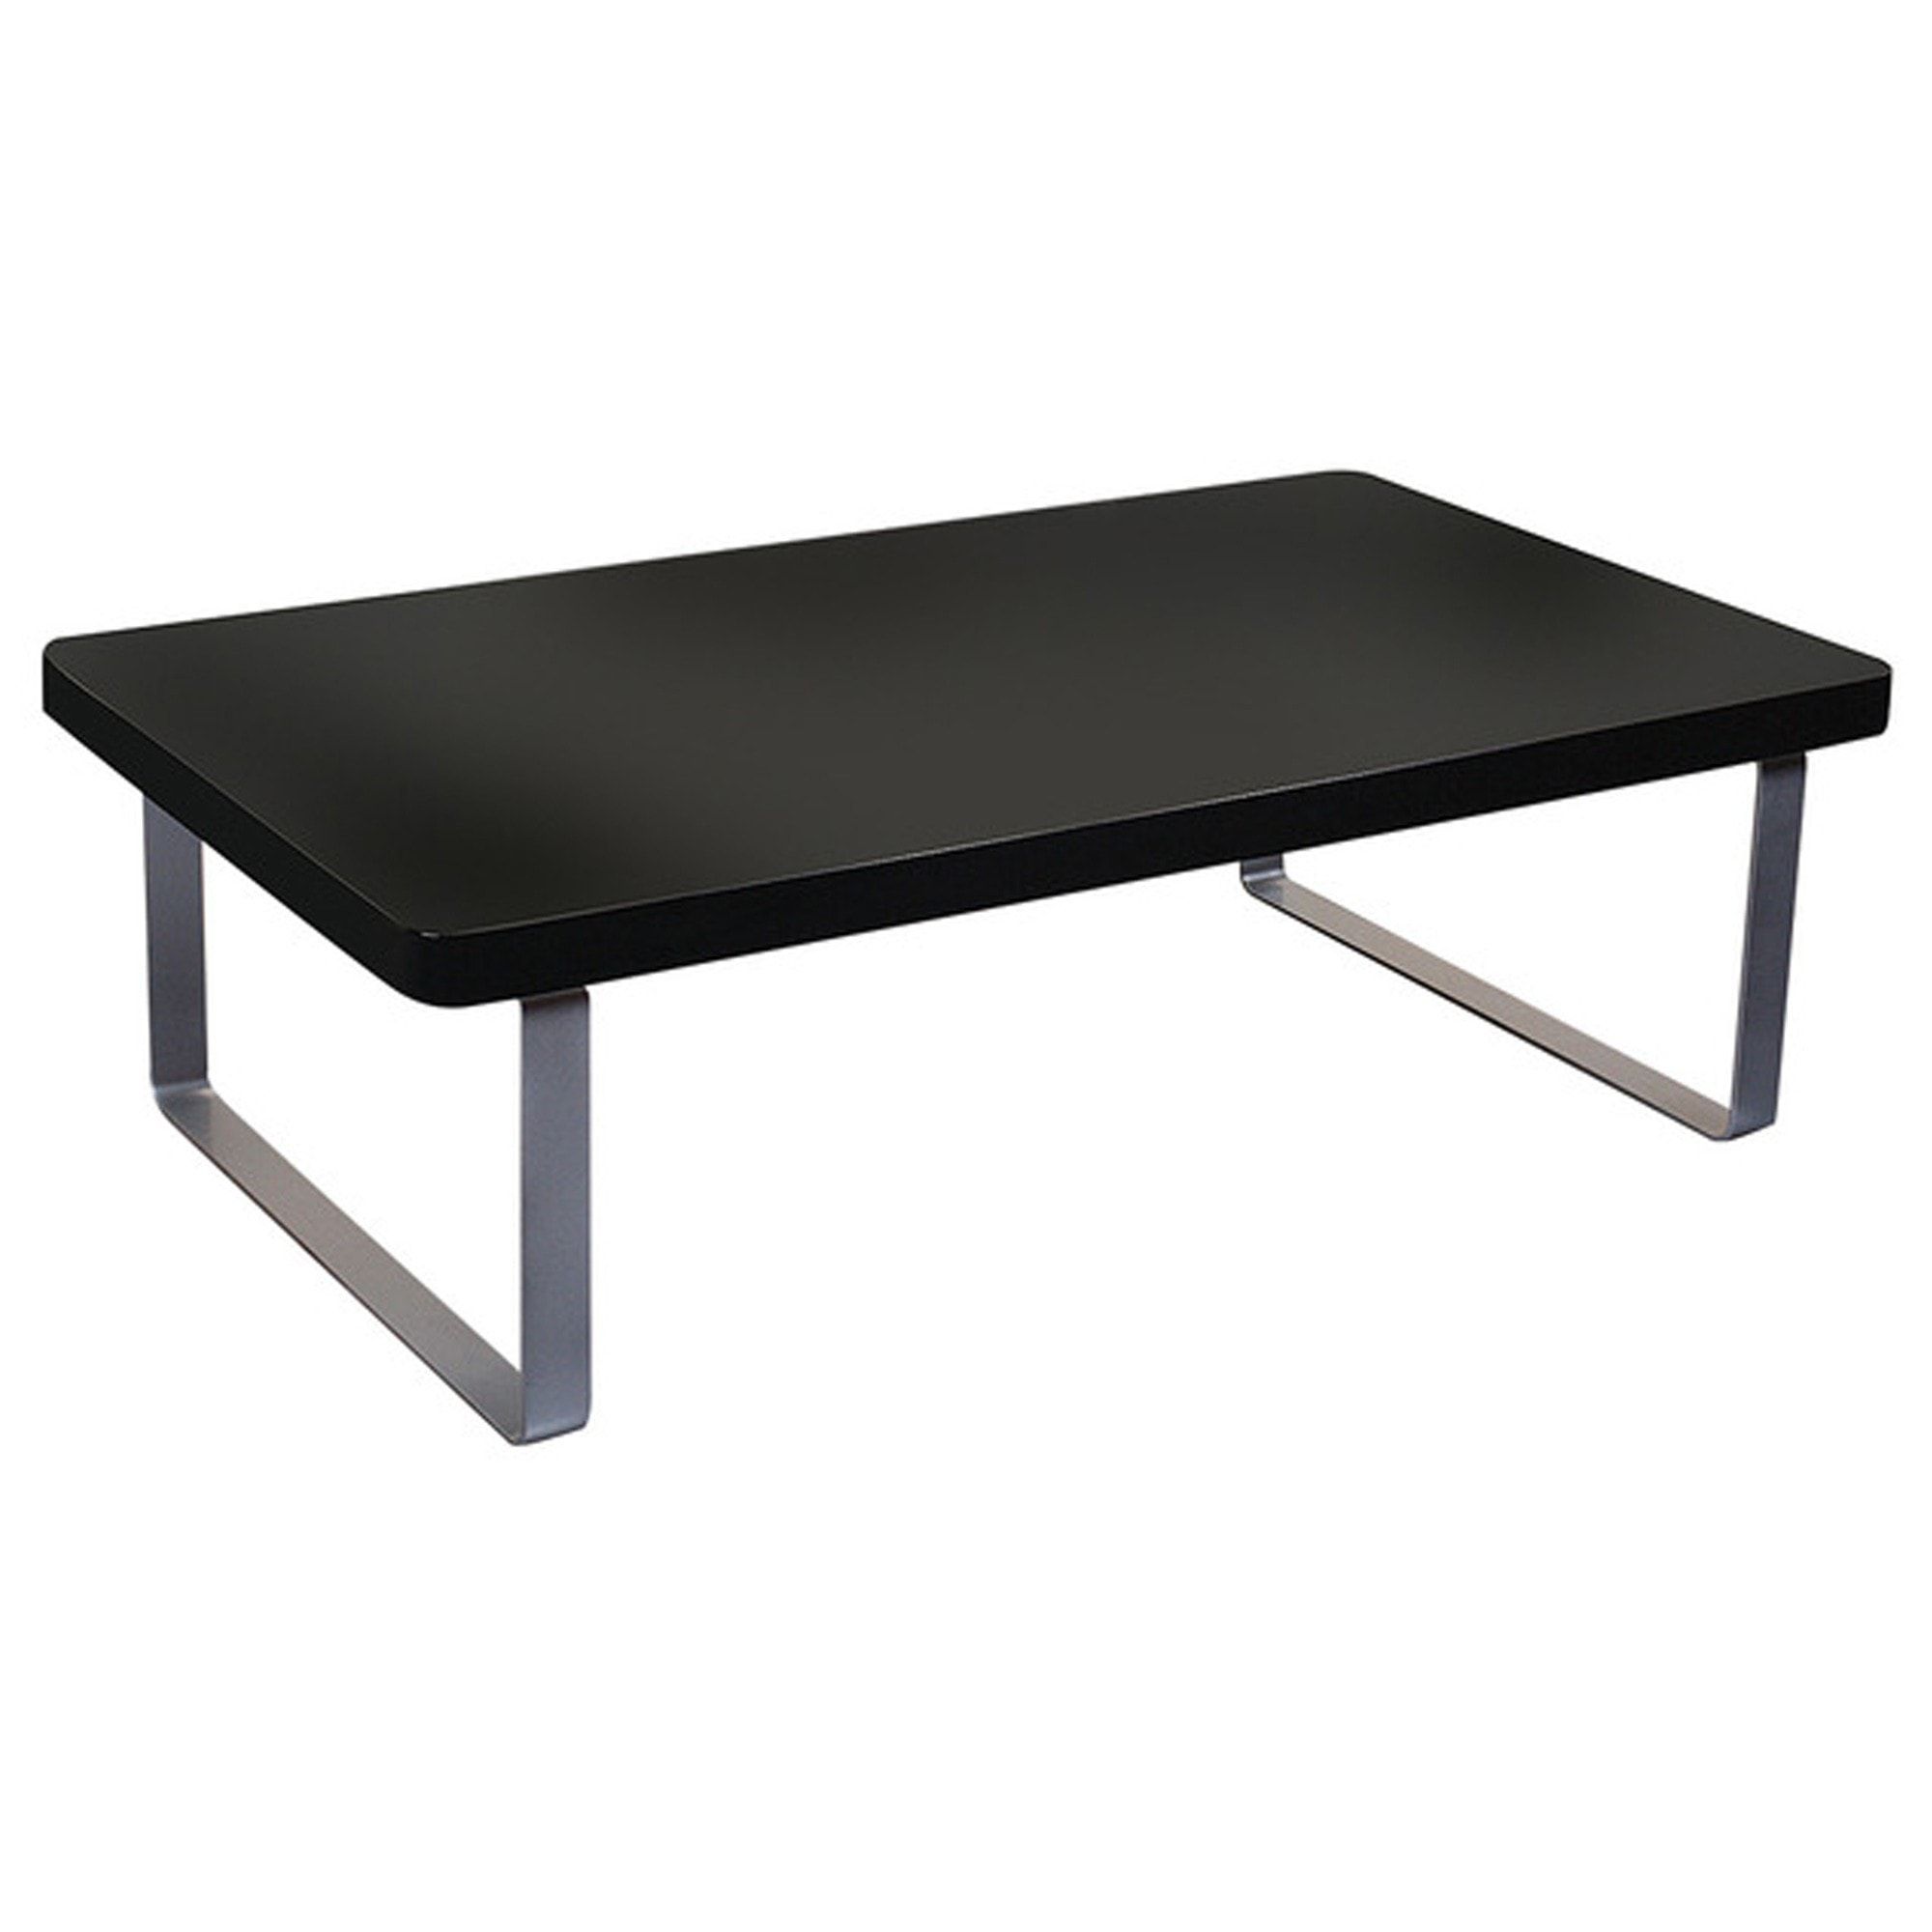 Accent Black High Gloss Coffee Table | Black Coffee Table Pertaining To High Gloss Black Coffee Tables (View 4 of 20)